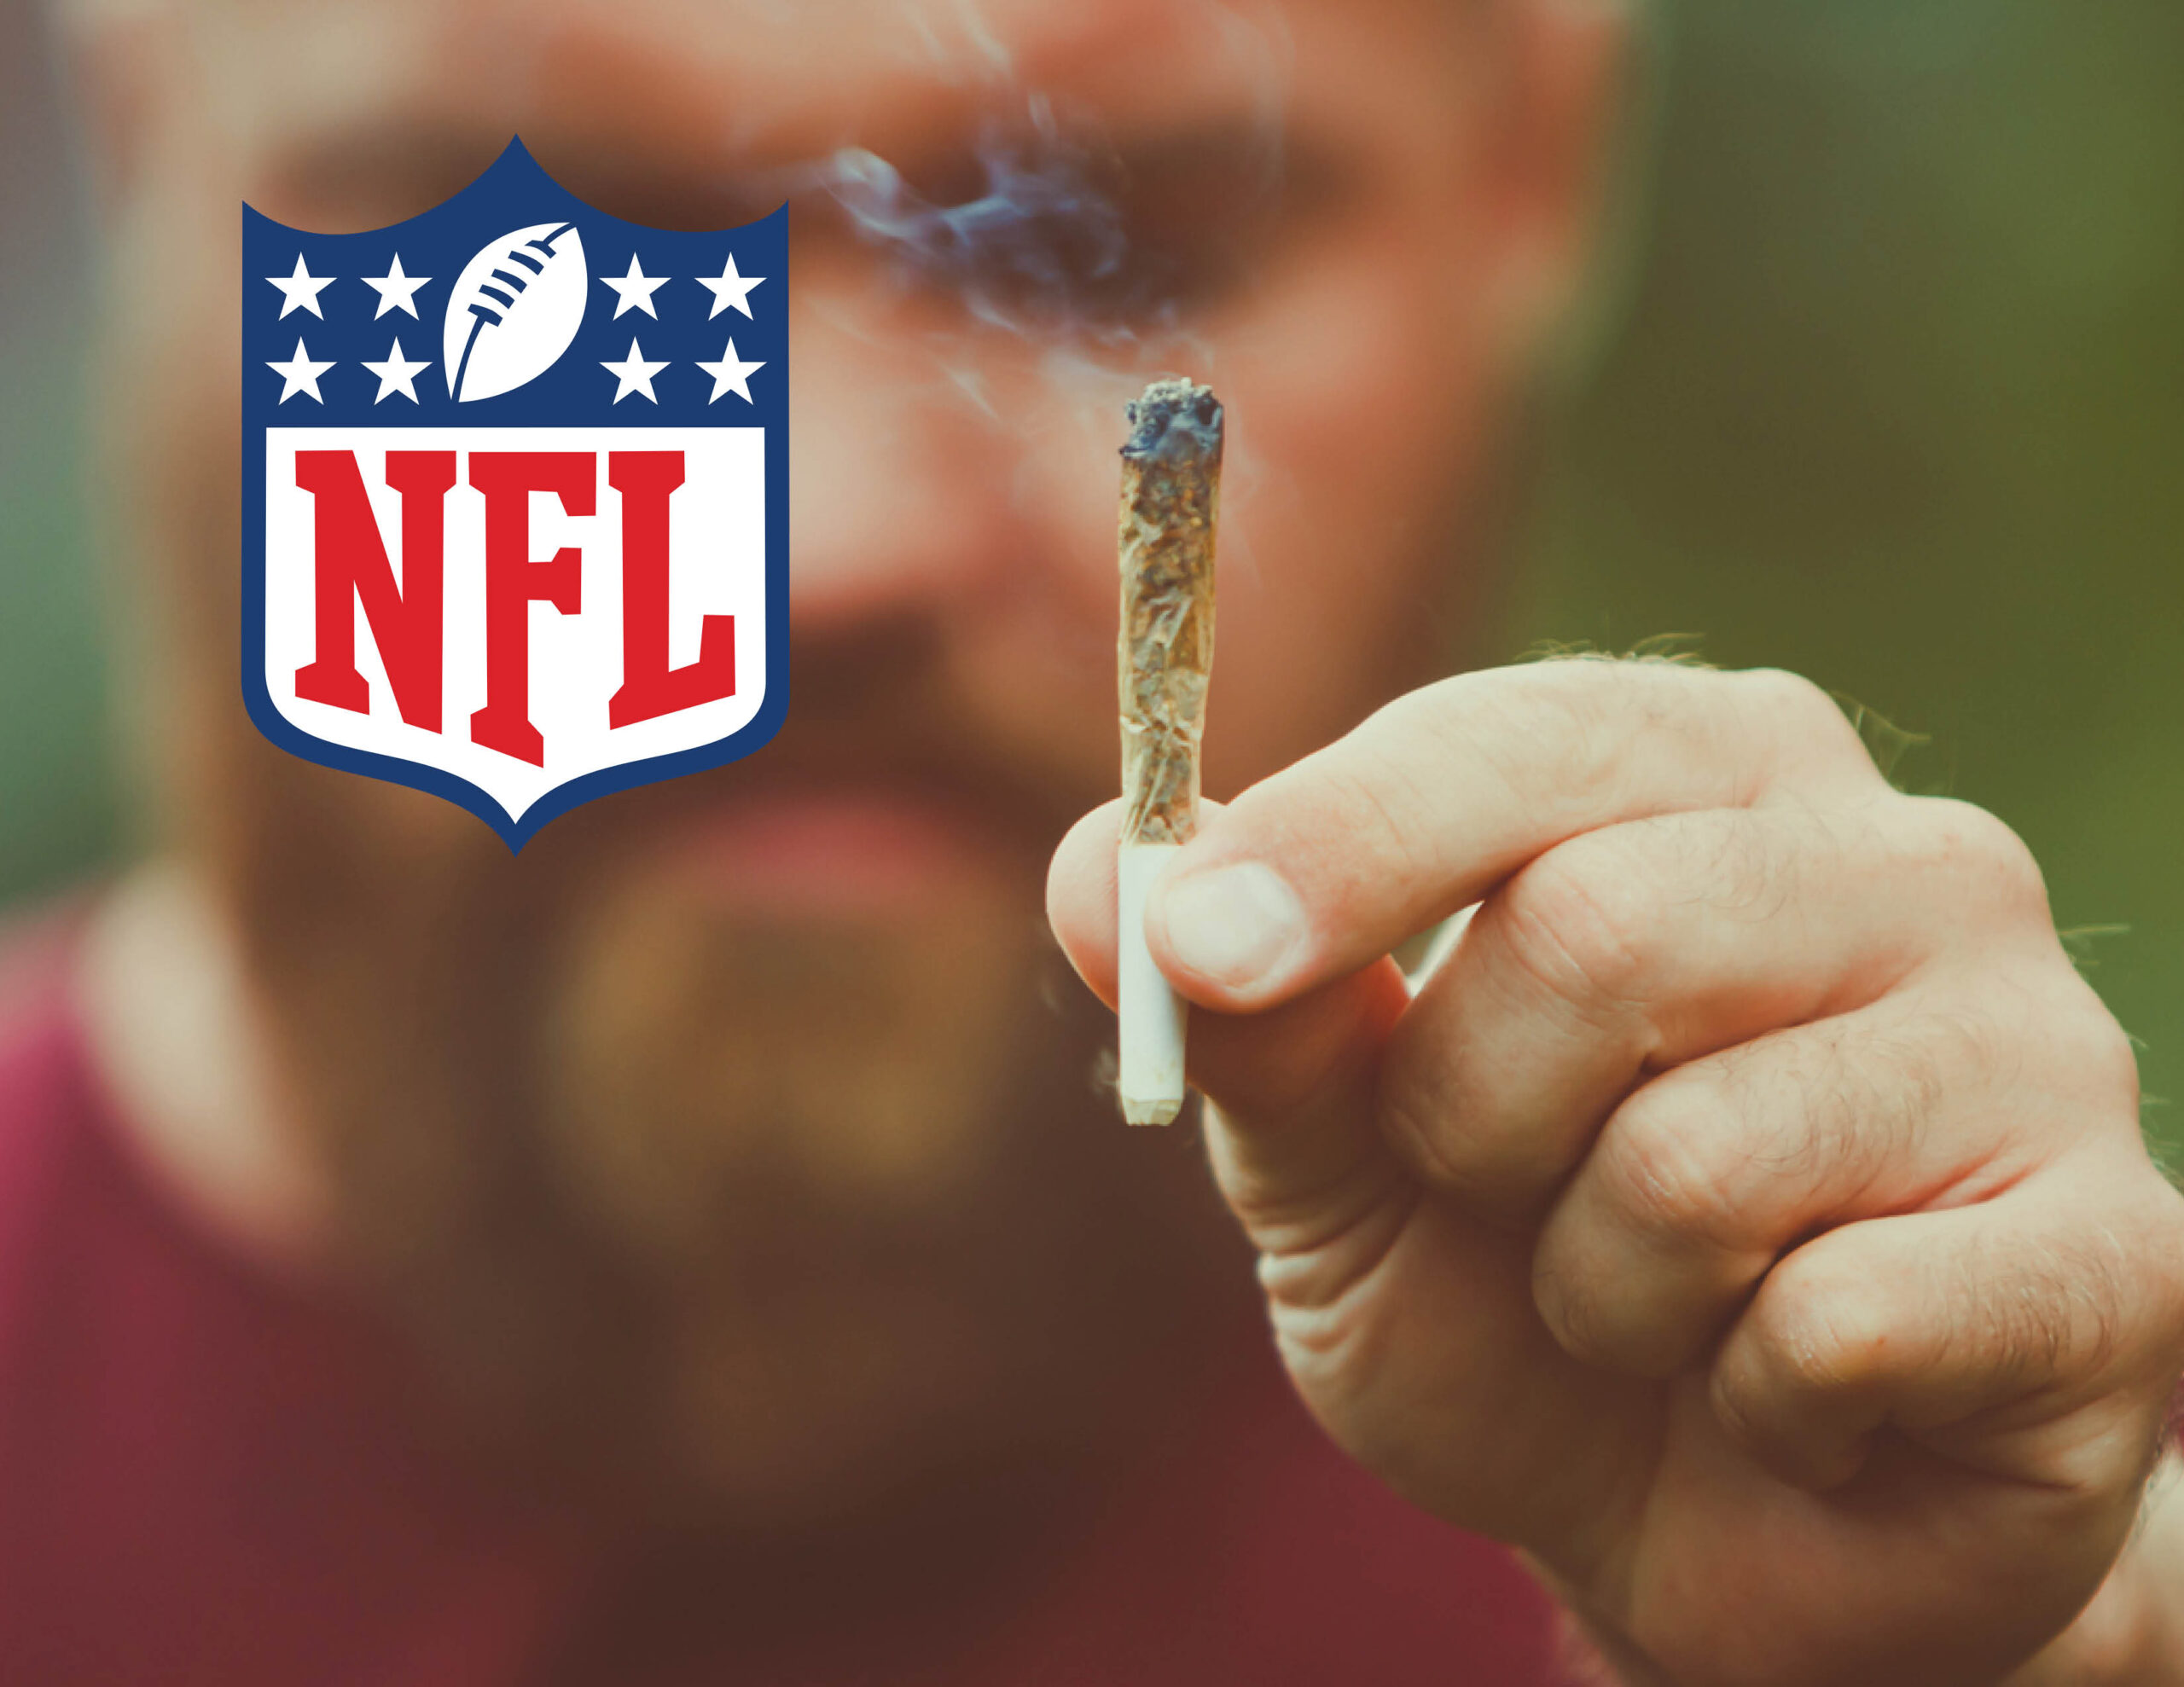 NFL Players can smoke marijuana for the first time during the offseason and the window opened on 4/20